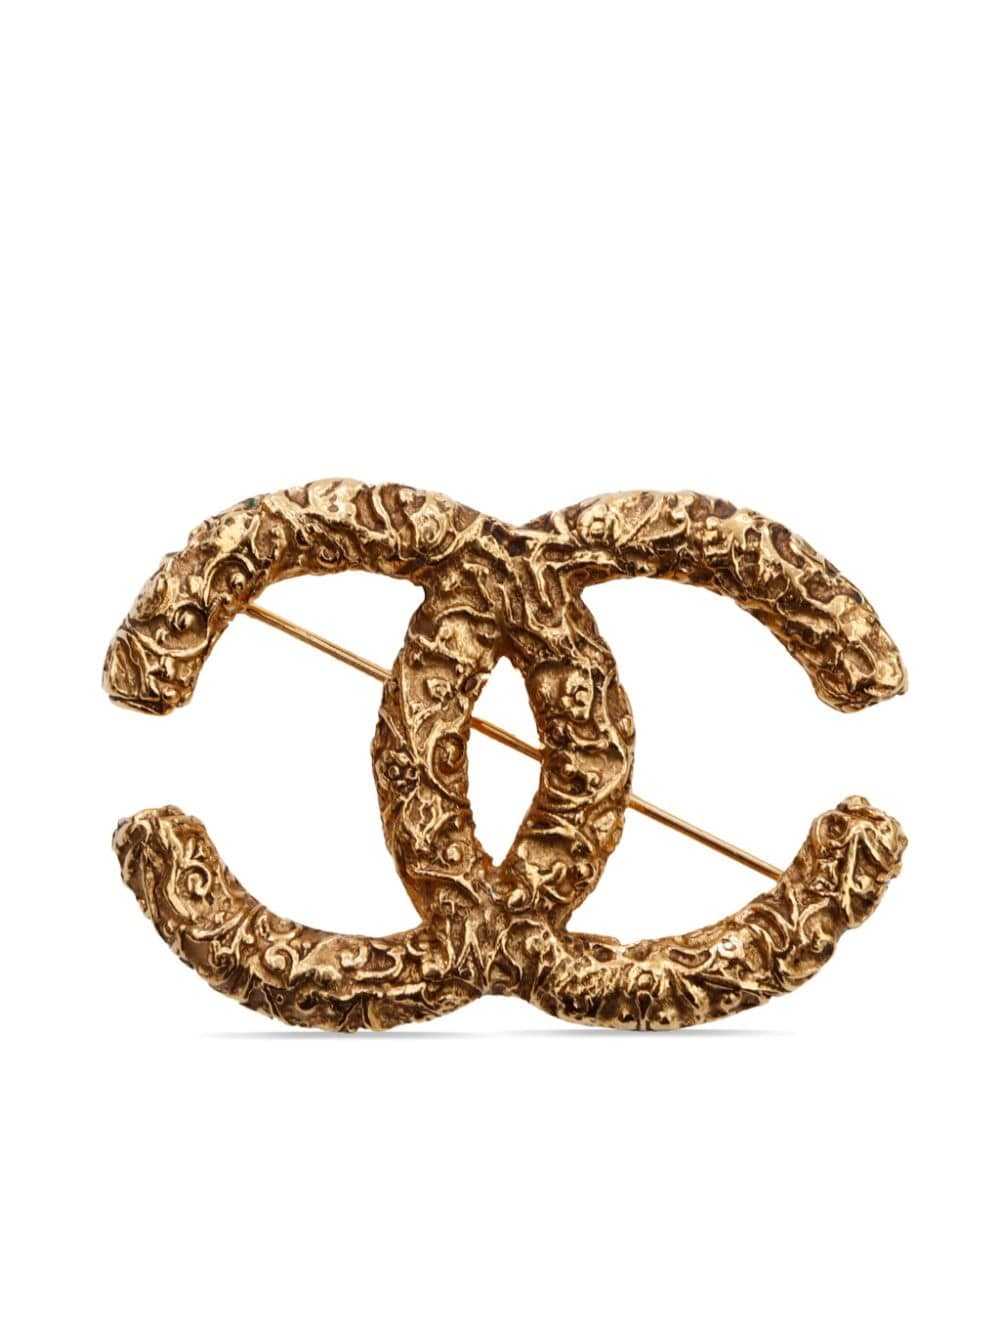 CHANEL Pre-Owned 1993 CC gold plated brooch - image 1